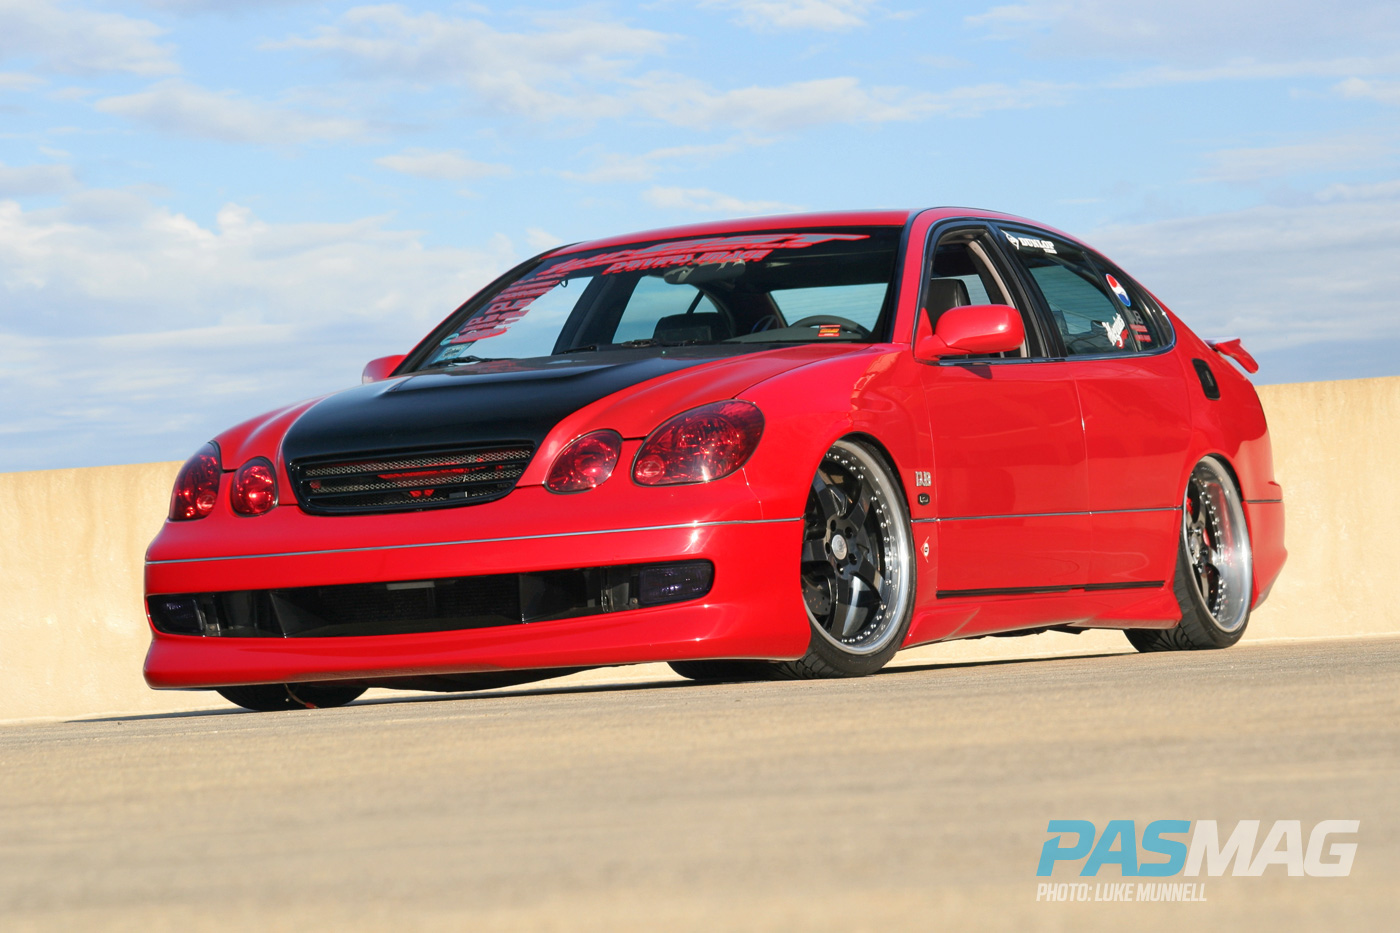 The 40 Year Old Virgin: Paul Tolson's 1998 Lexus GS400 - PASMAG is the  Tuner's Source for Modified Car Culture since 1999